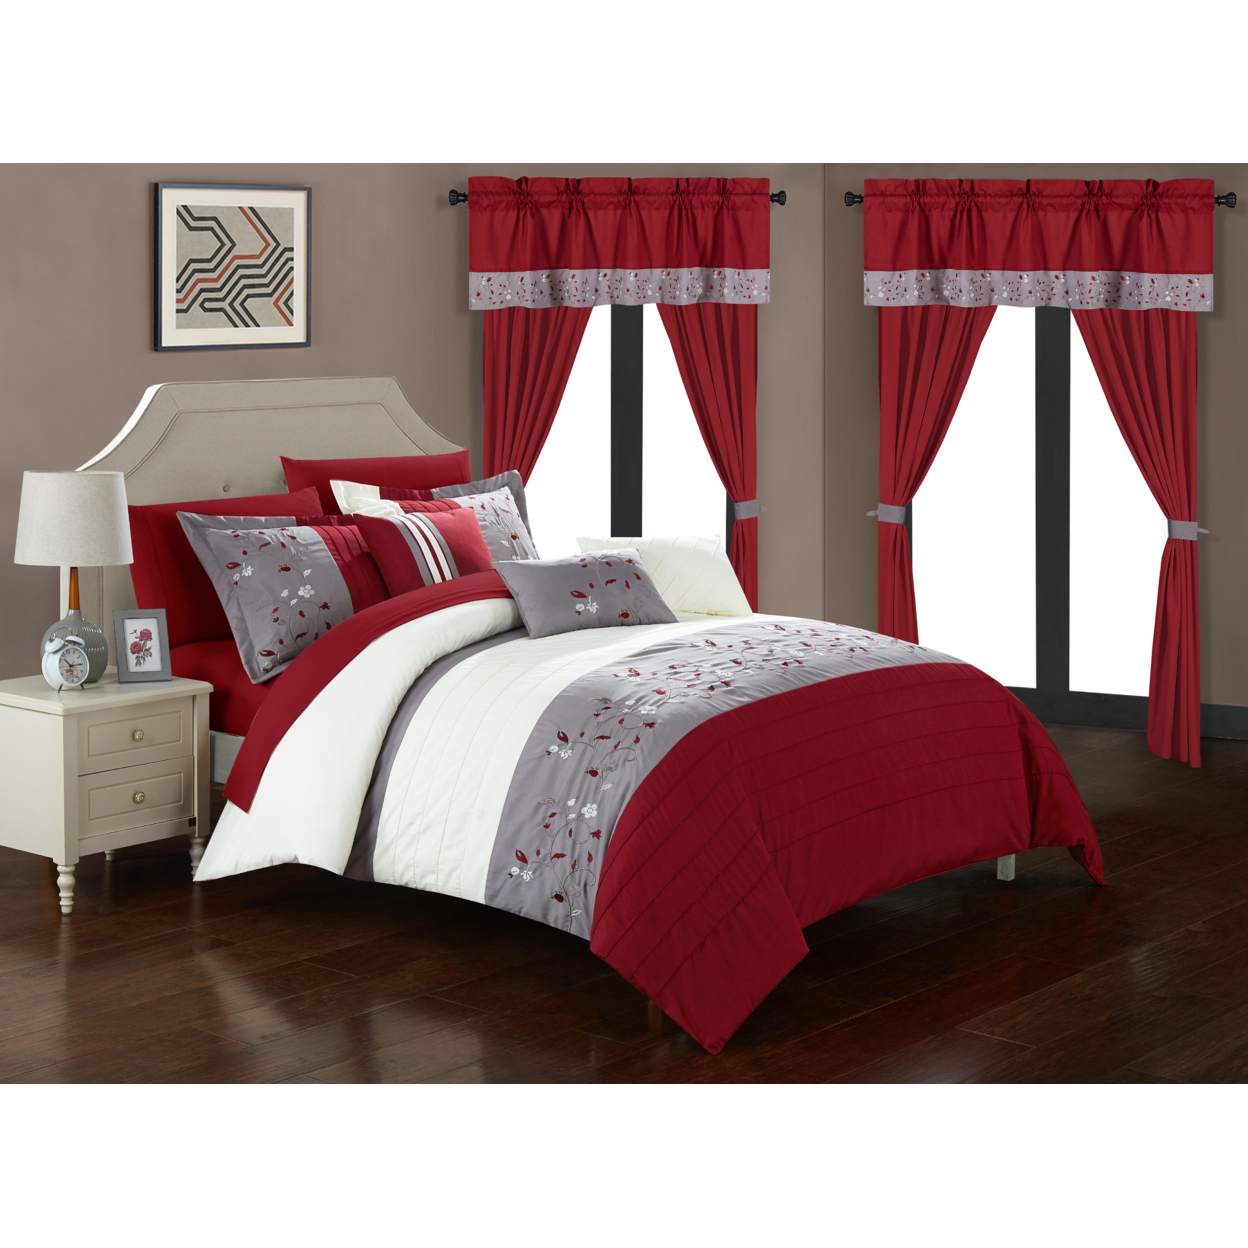 Sonita 20-Piece Bedding Set With Comforter, Sheets & Curtains, Mult. Colors - Red, Queen